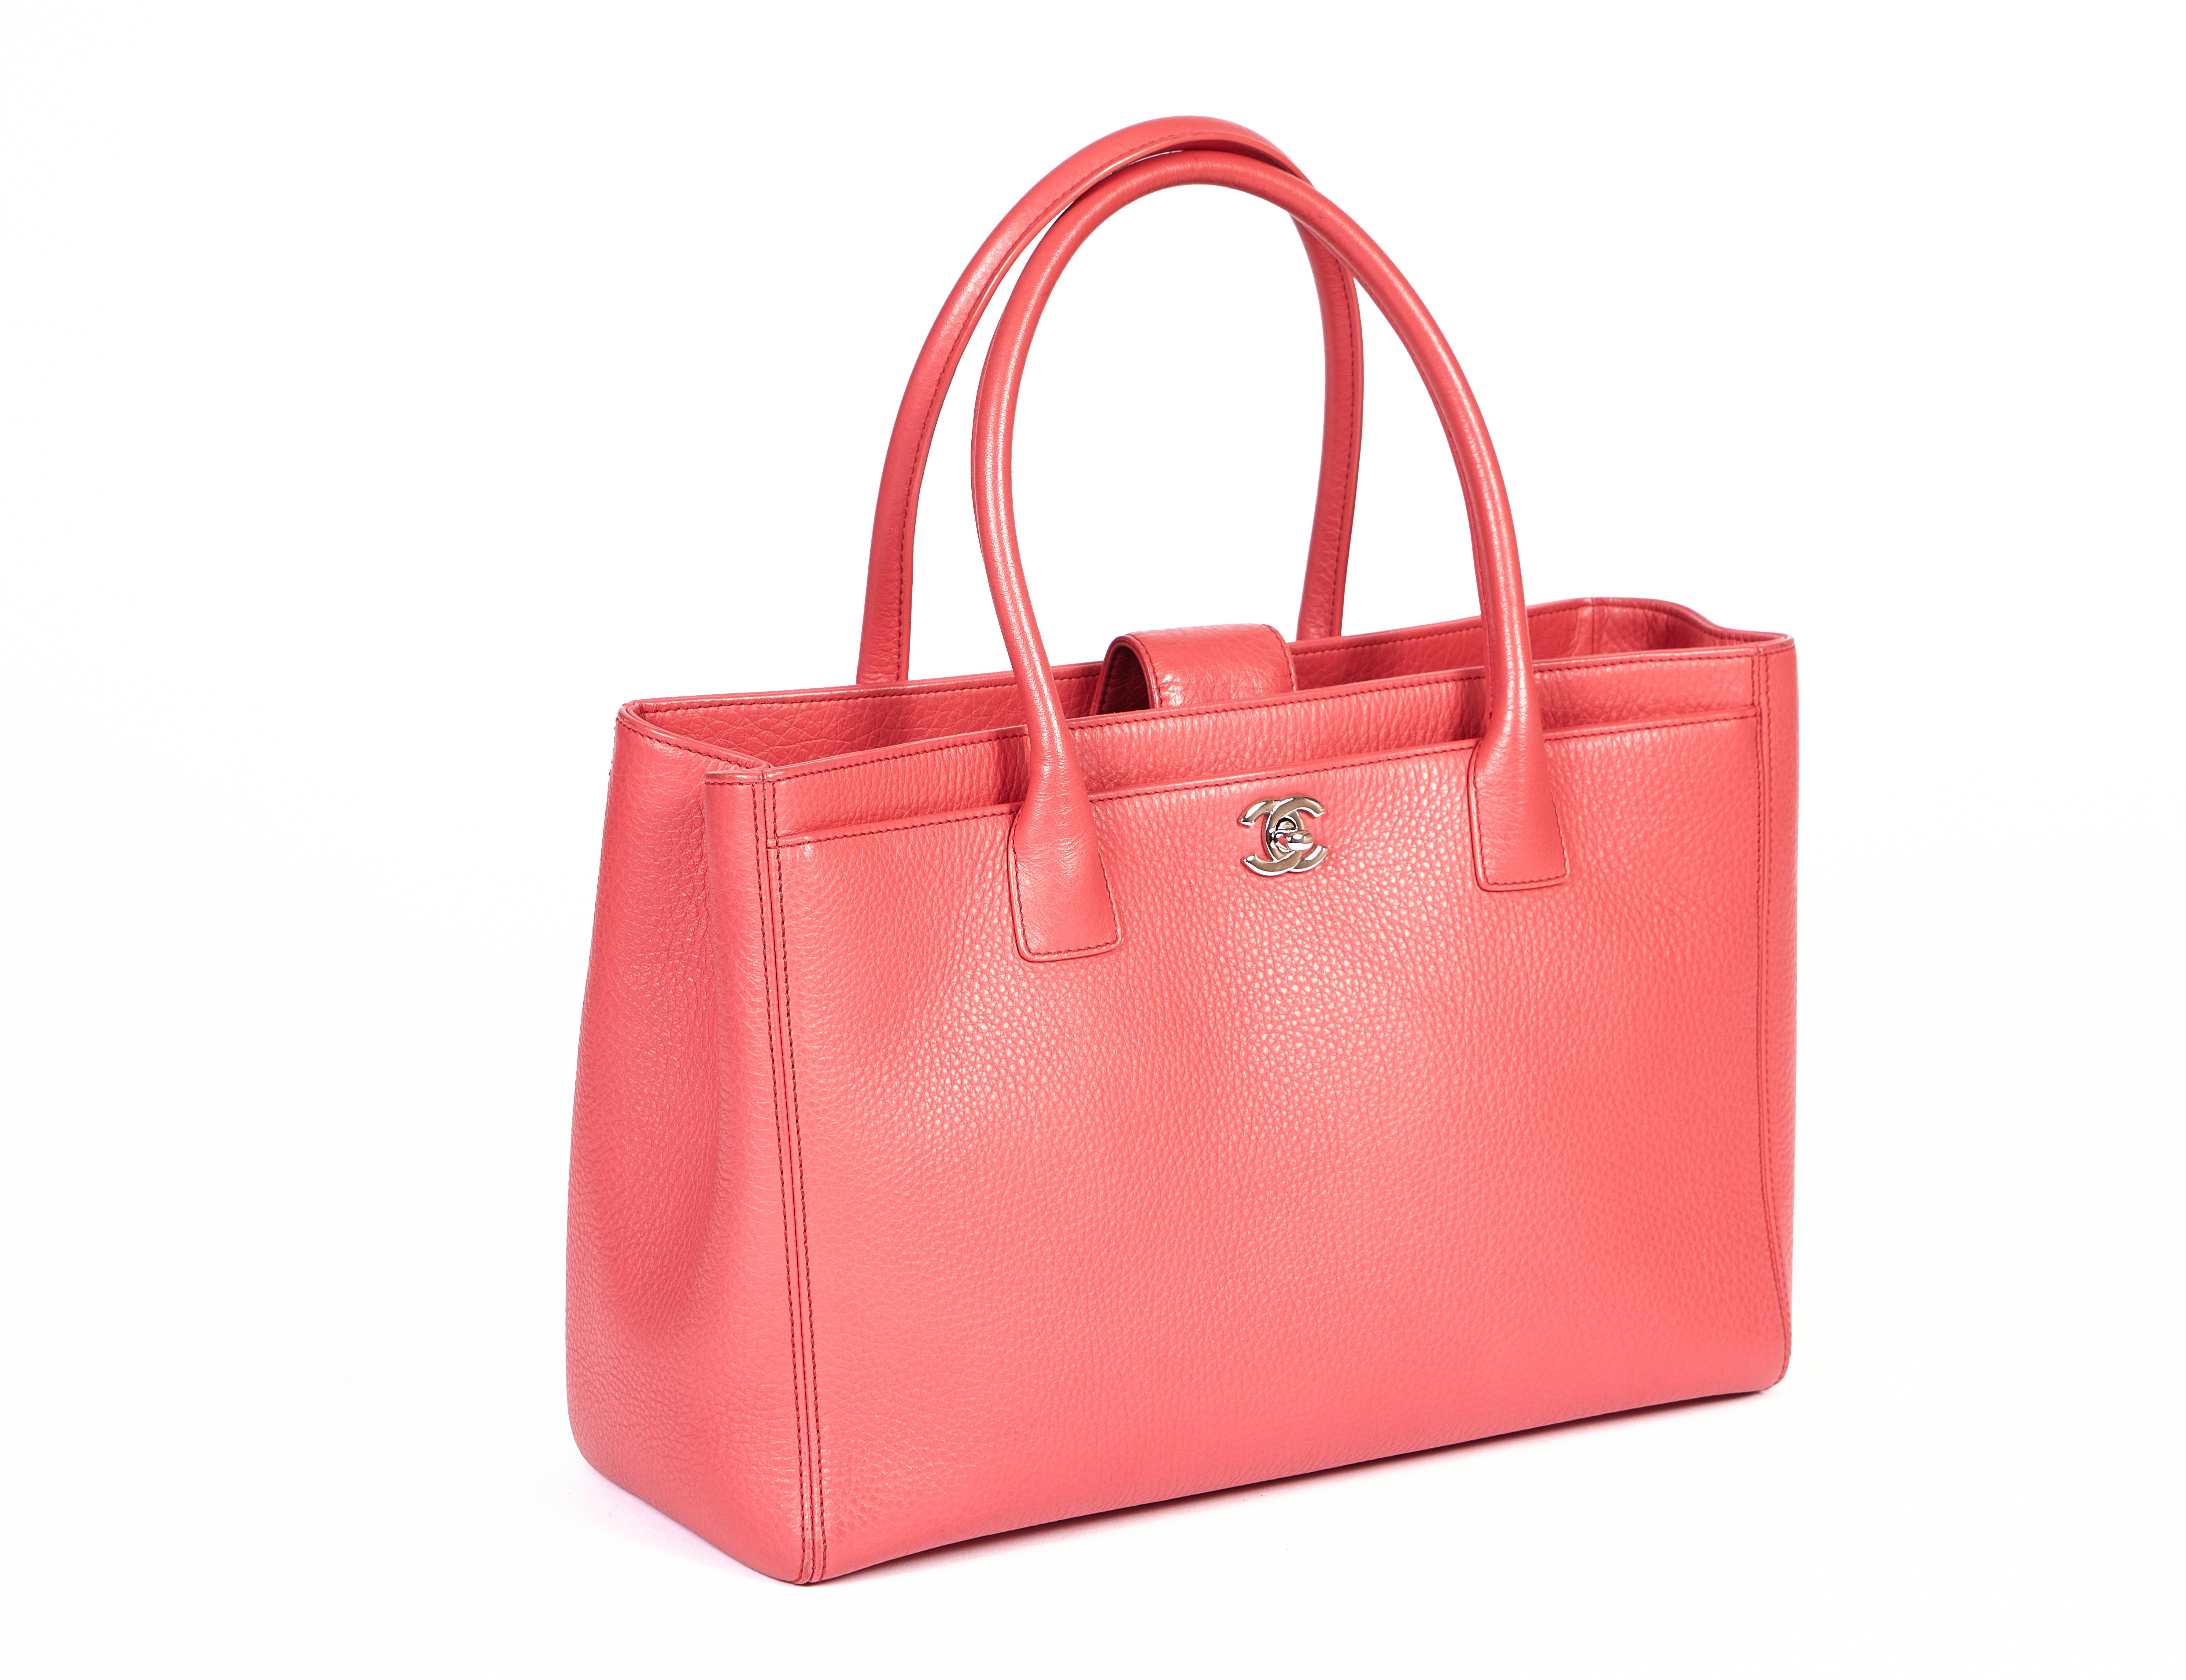 Chanel Oversize Coral Caviar Tote In Excellent Condition For Sale In West Hollywood, CA